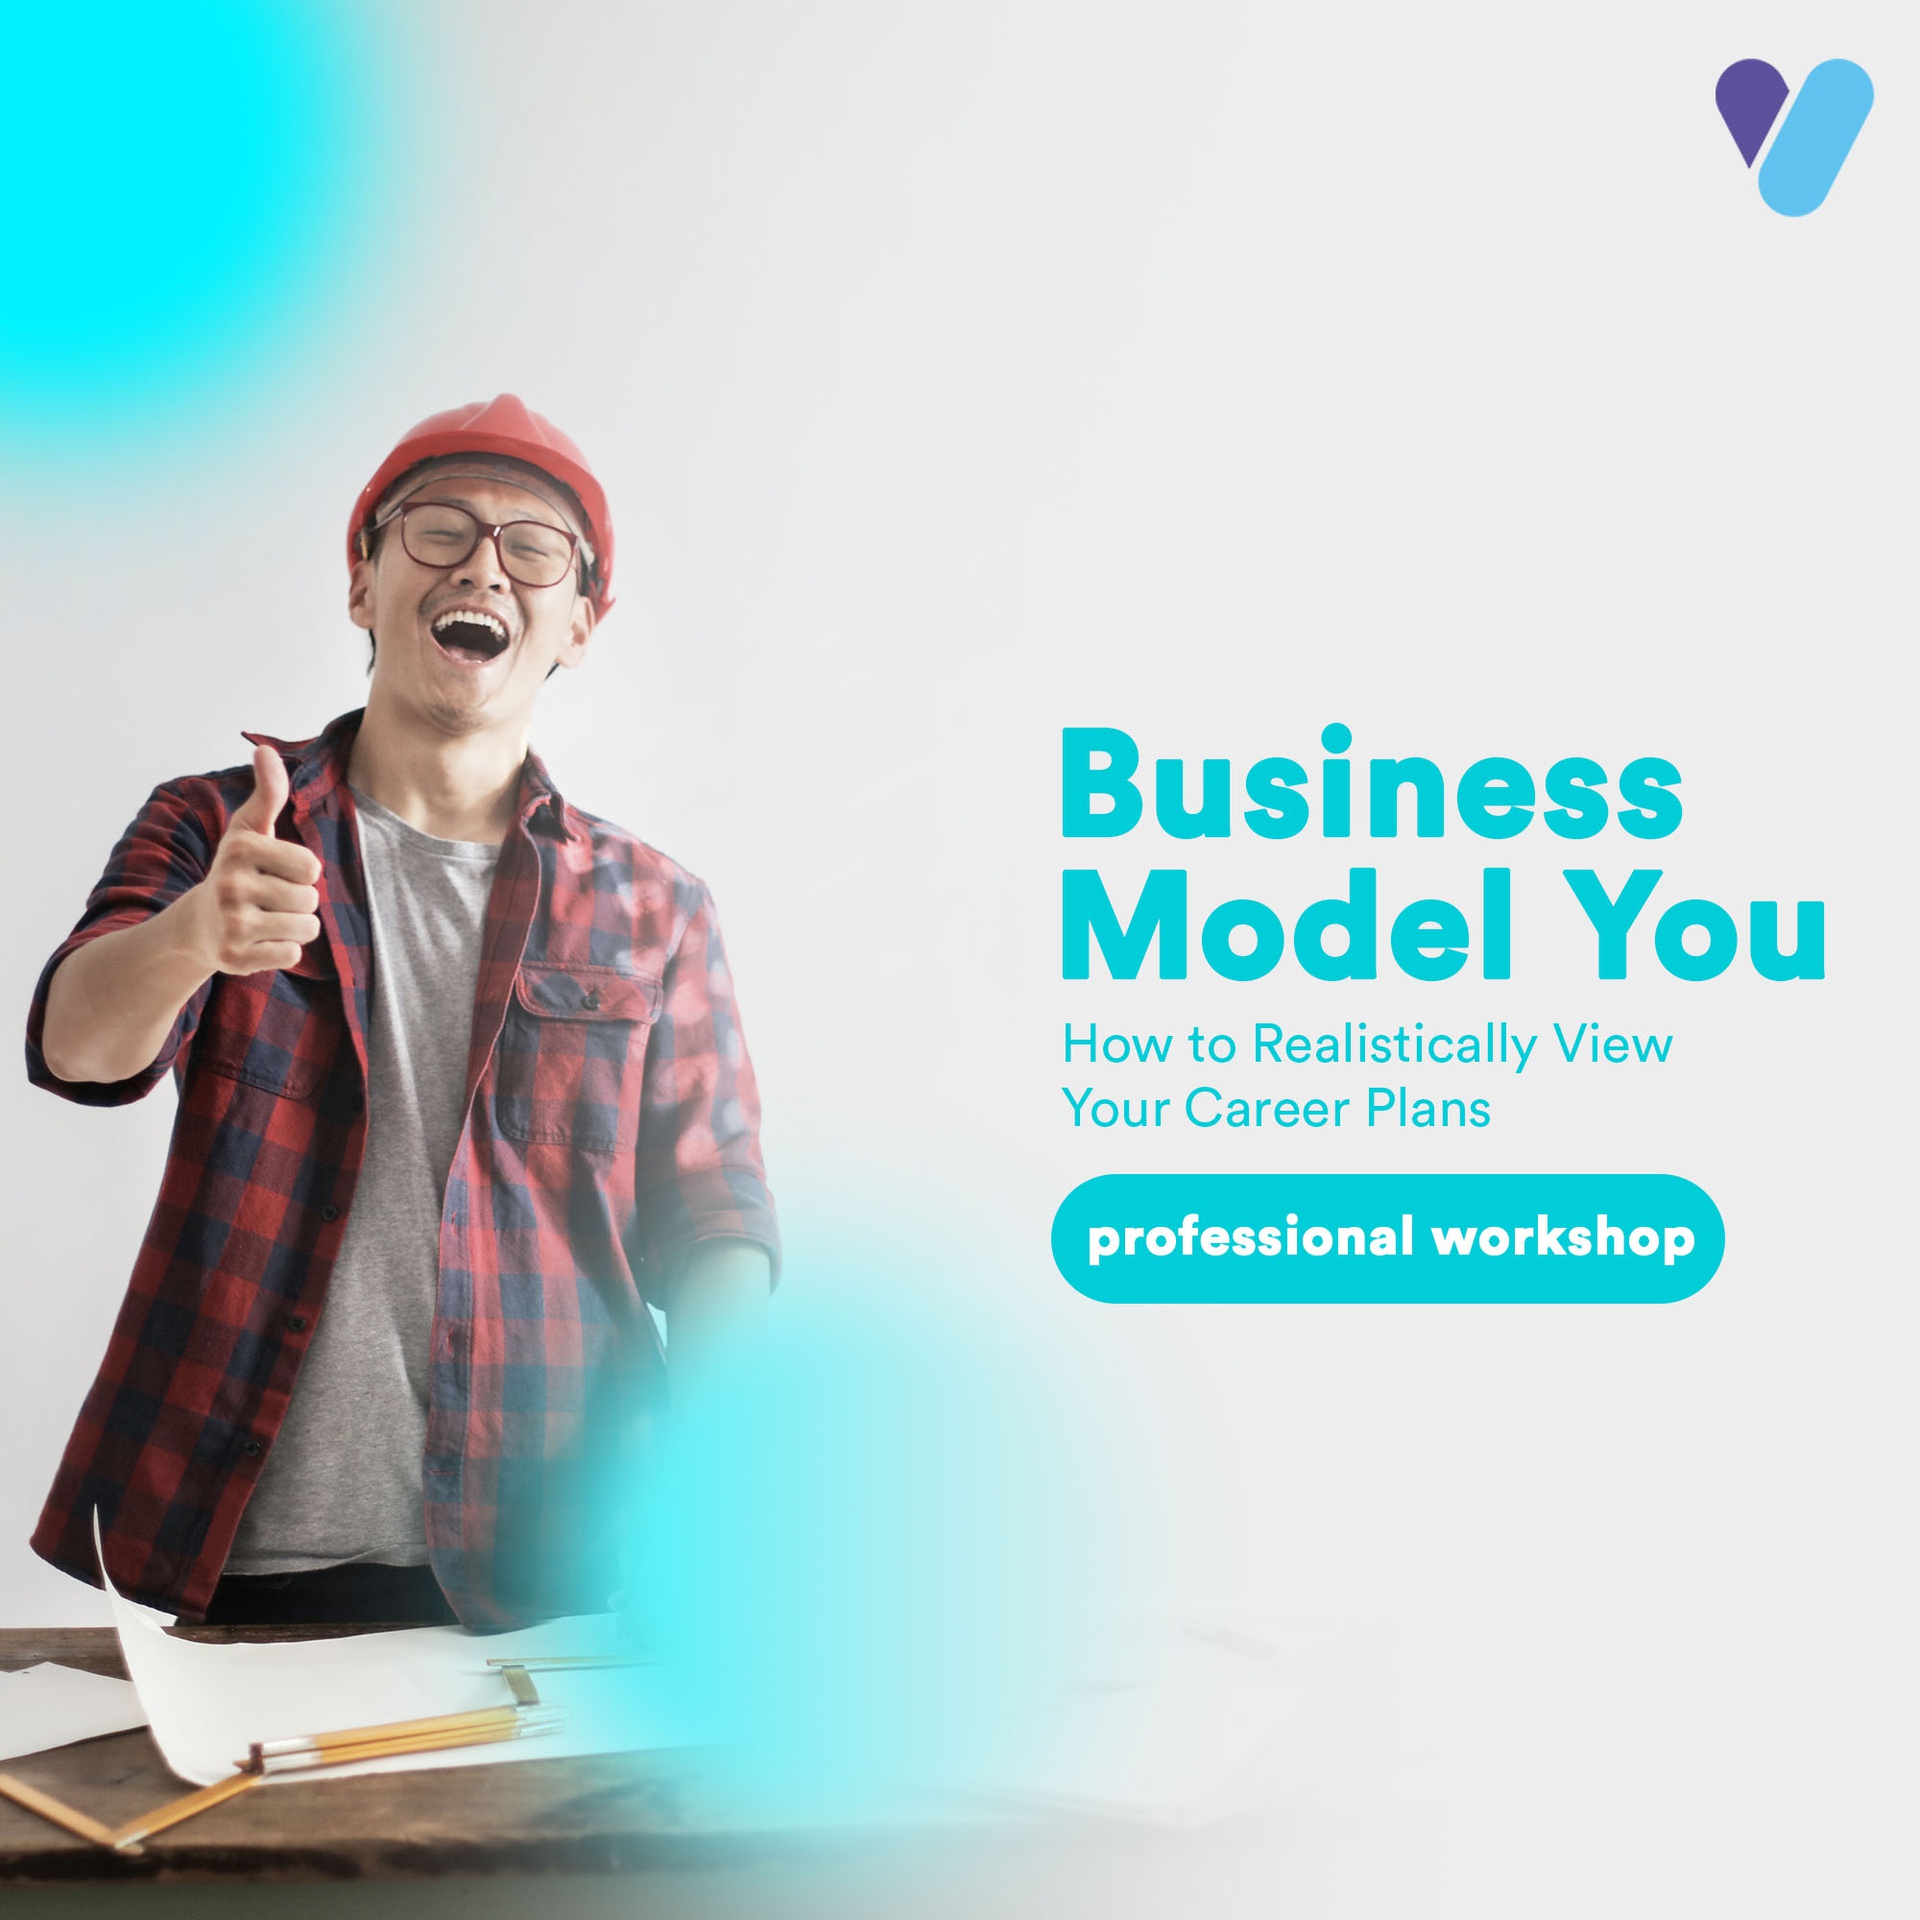 Business Model You: How to Realistically View Your Career Plans